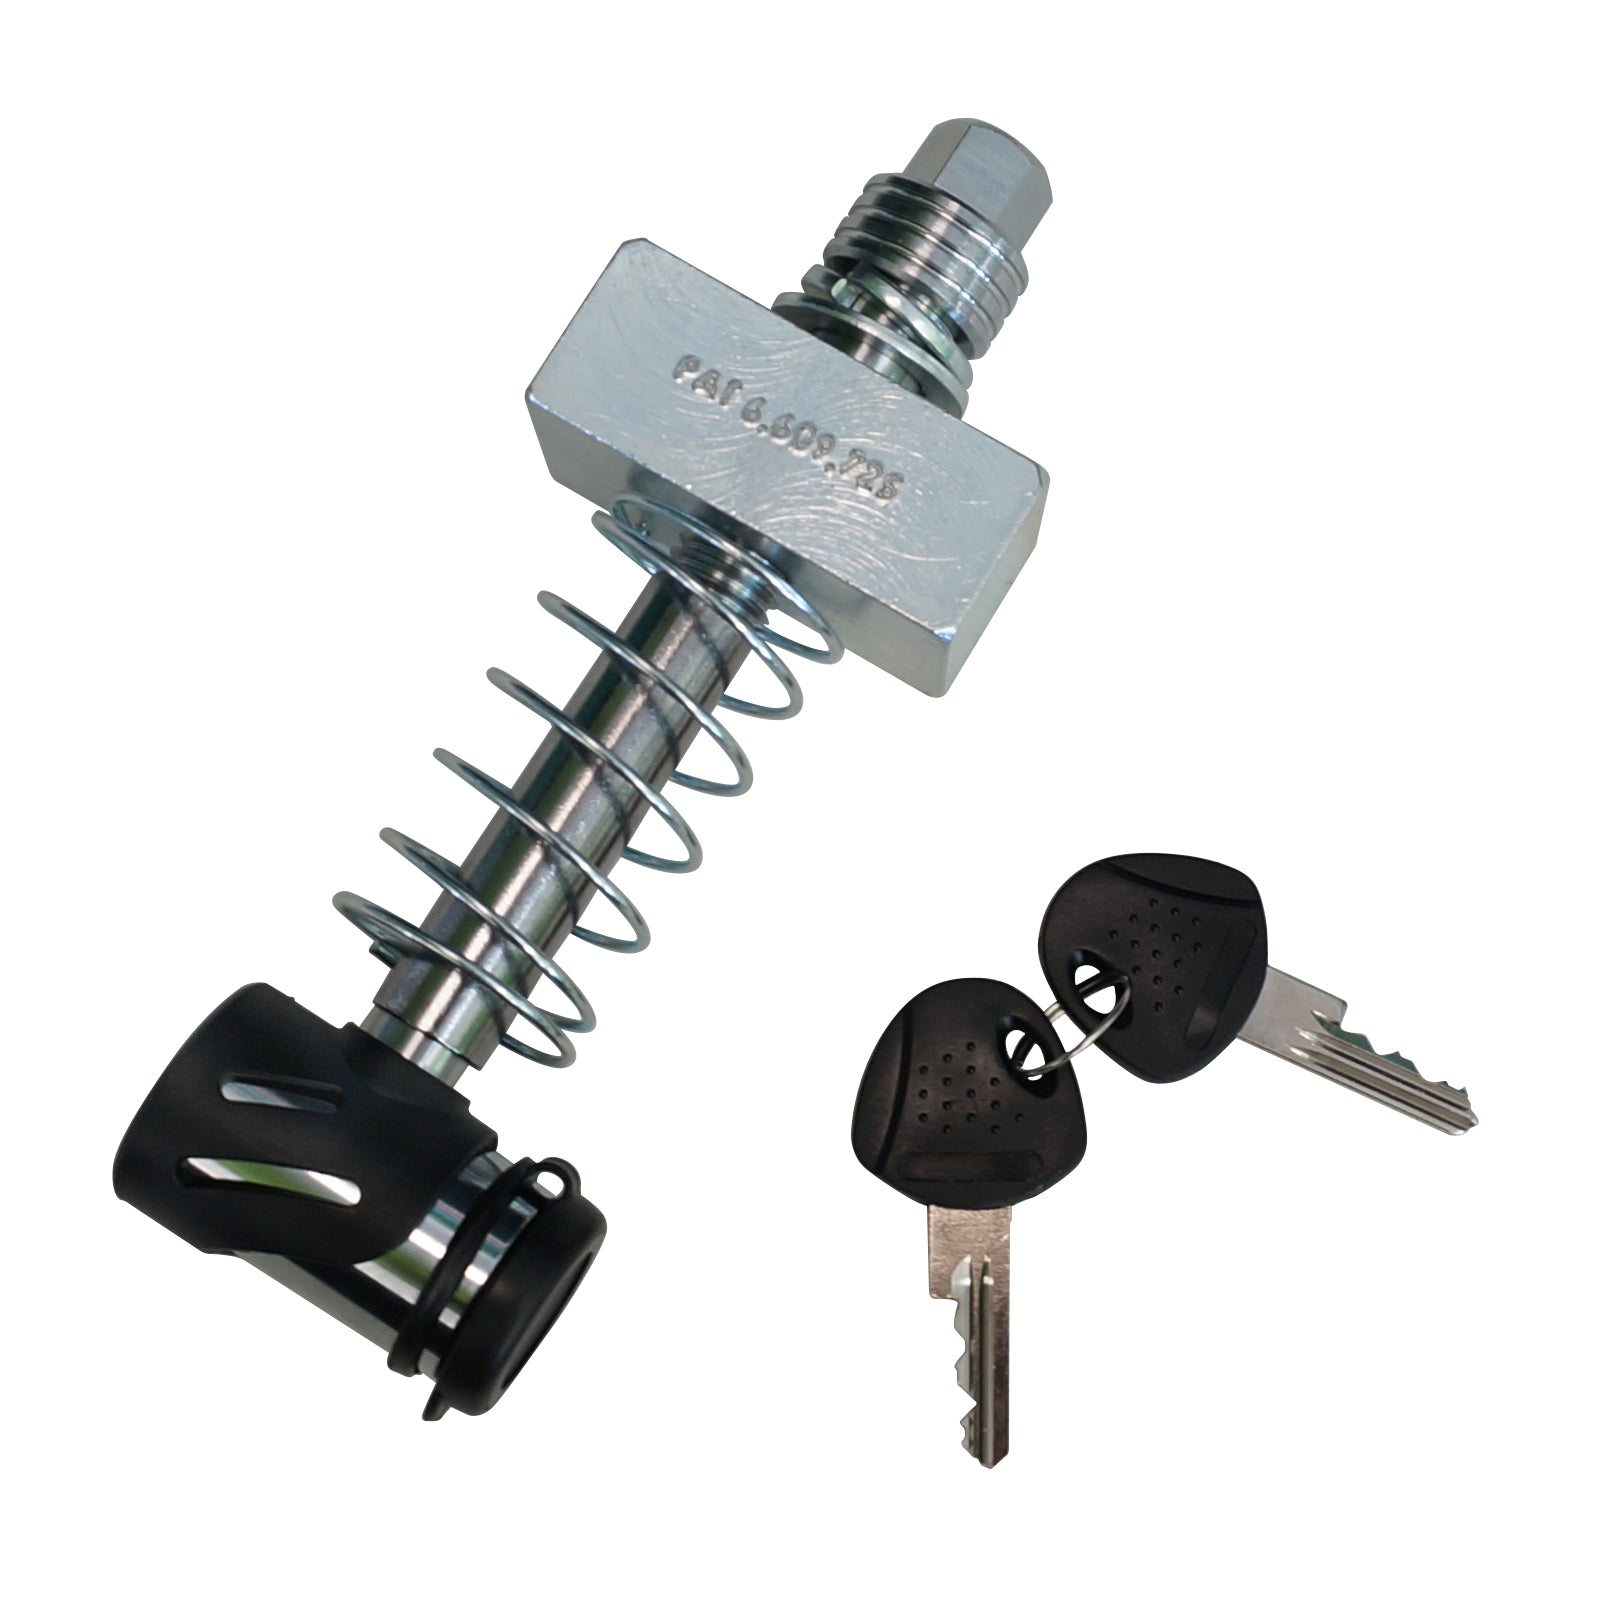 Press Release: Let’s Go Aero Announces Silent Hitch Pin for 3-Inch Hitches